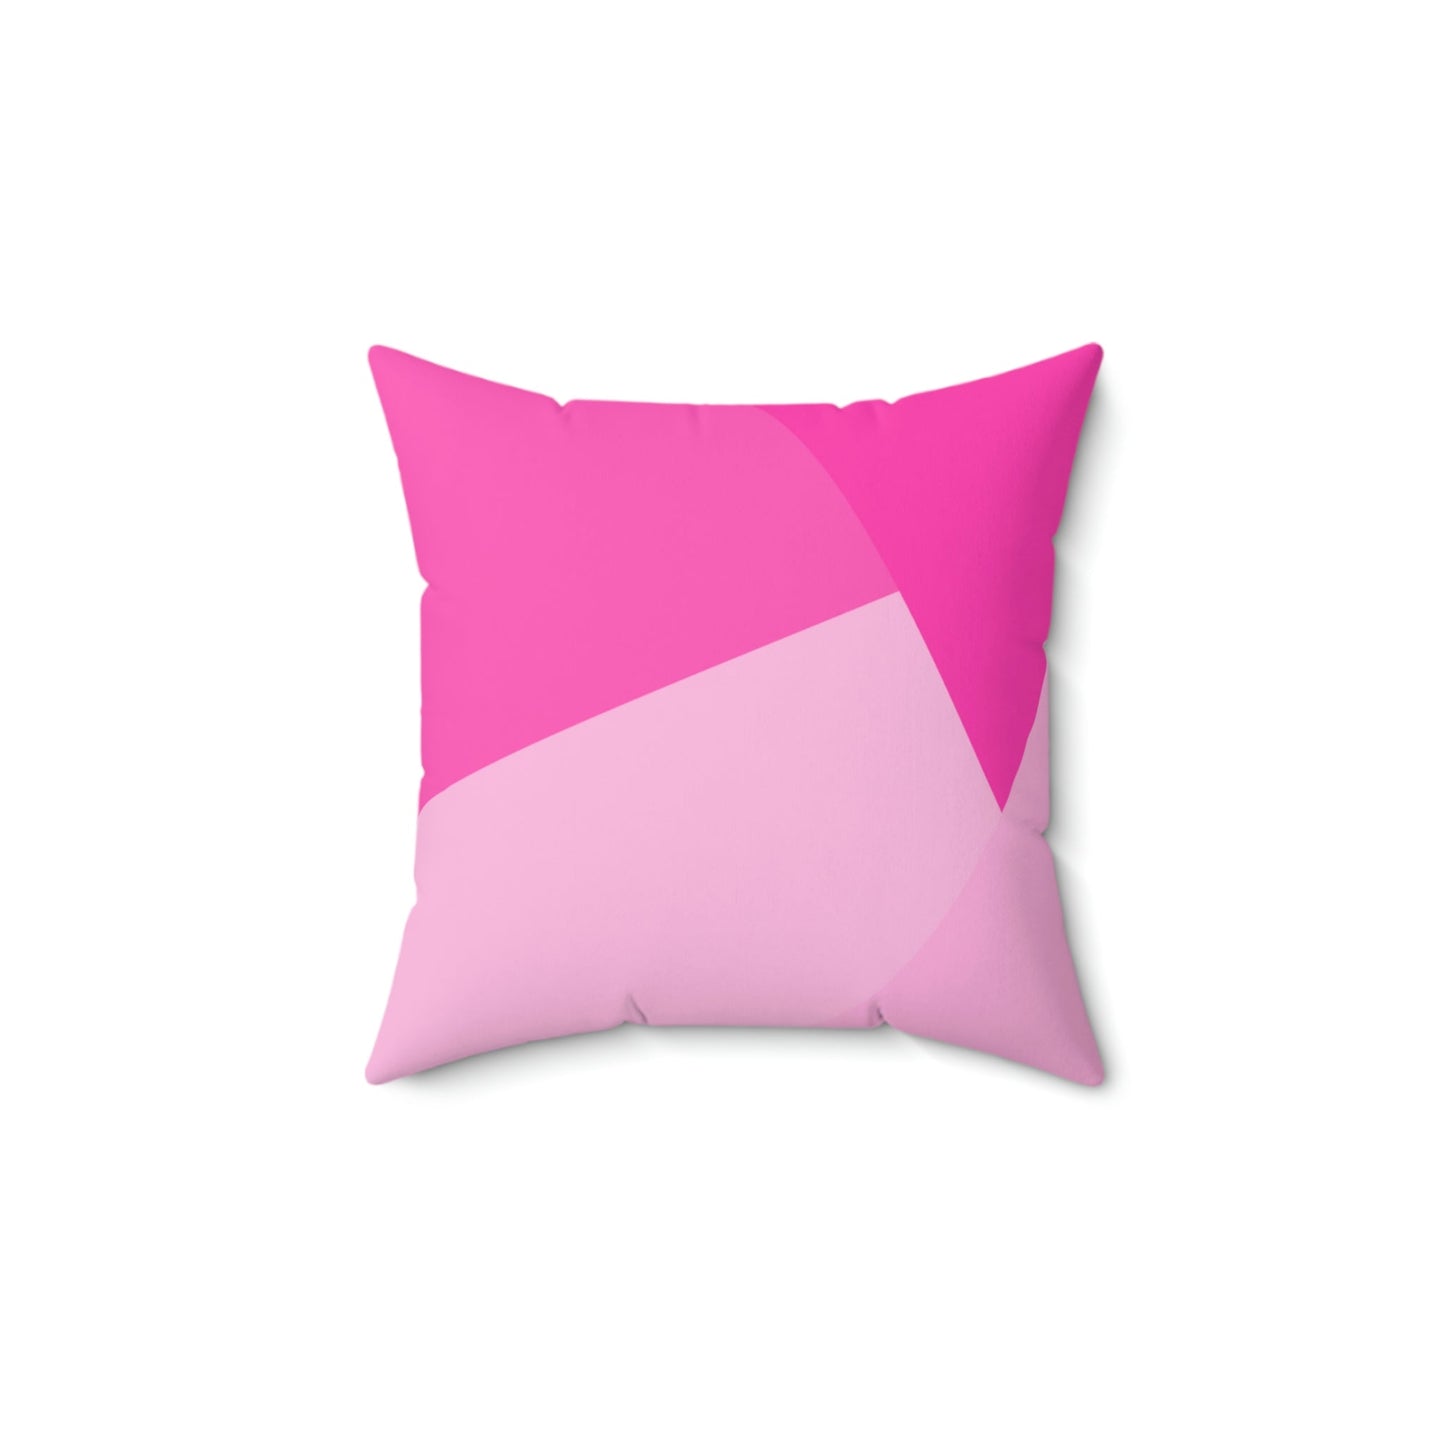 All Shades of Pink Square Pillow Home Decor Pink Sweetheart